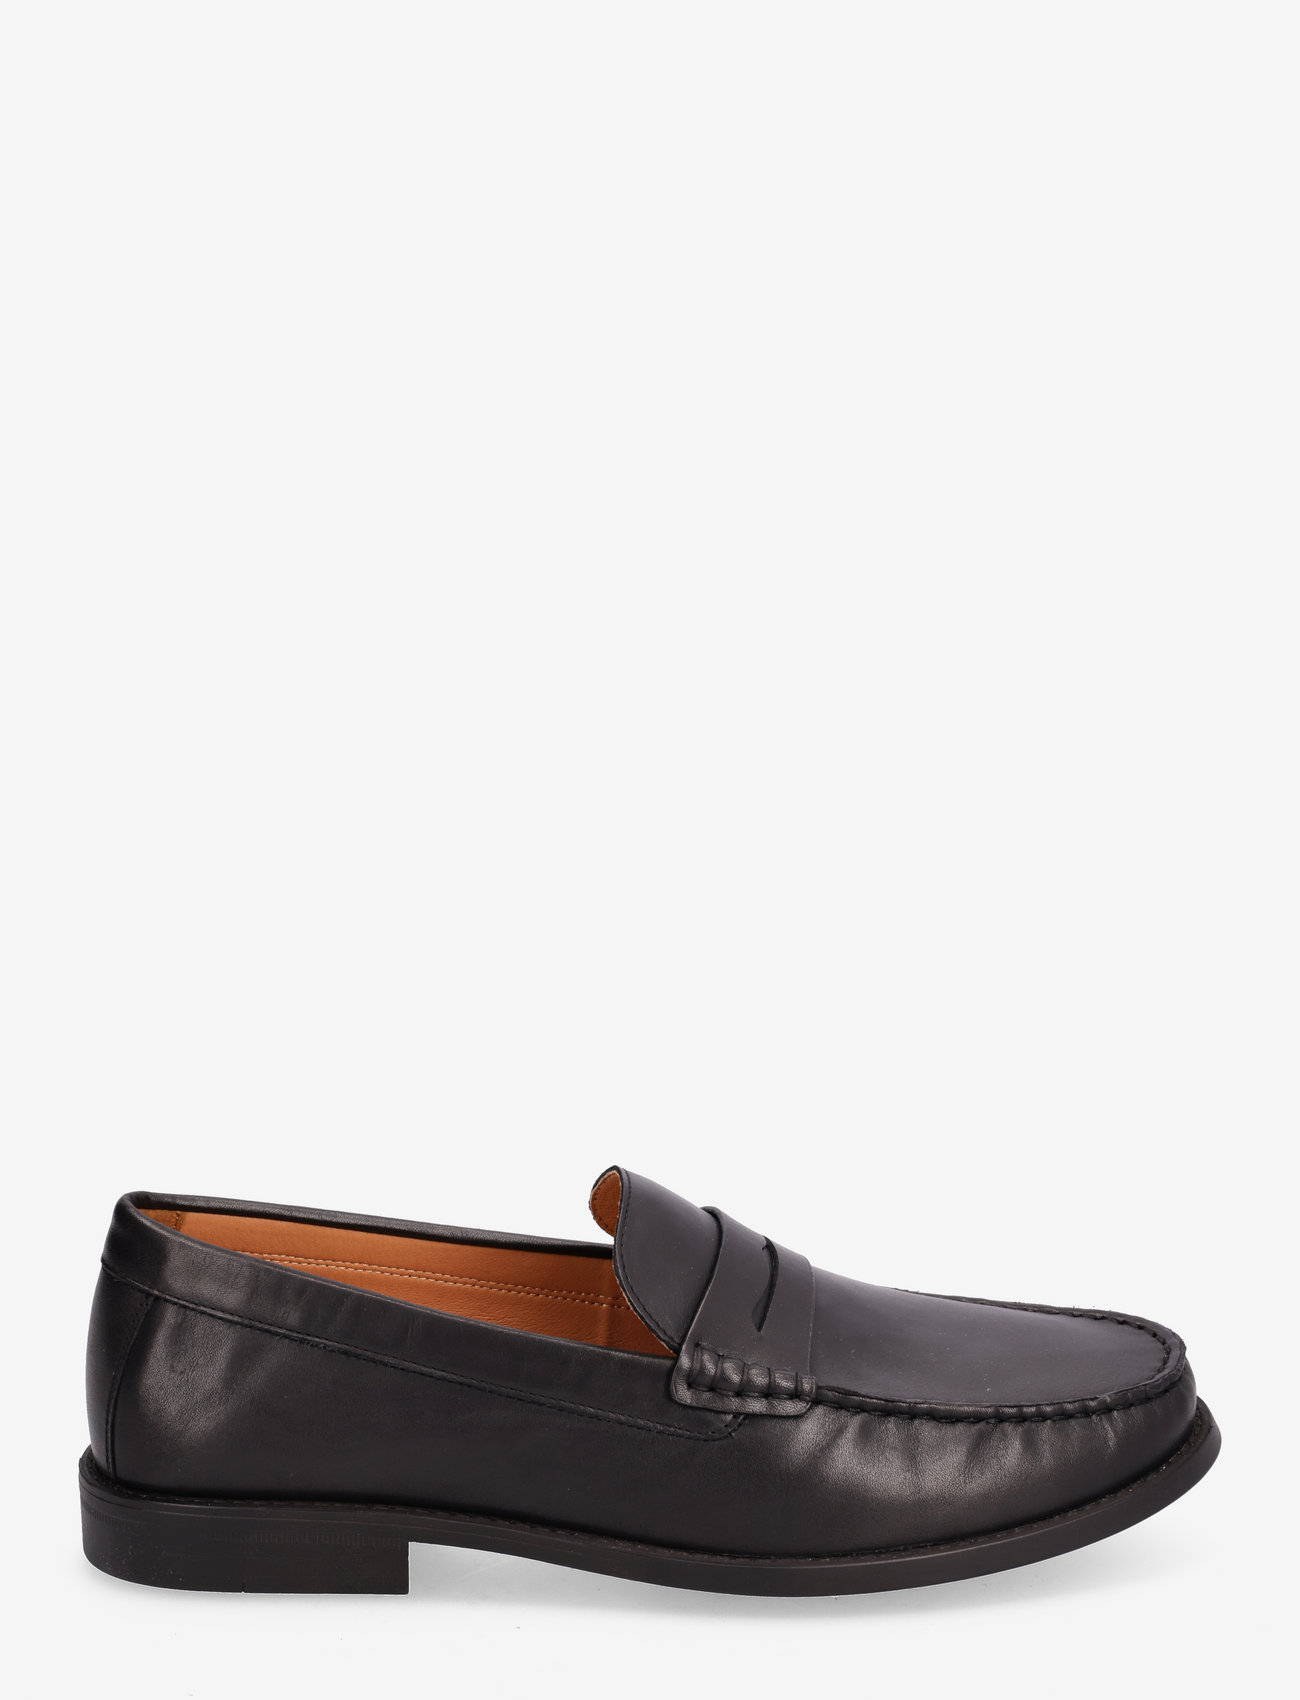 Mango - Leather penny loafers - black - 1